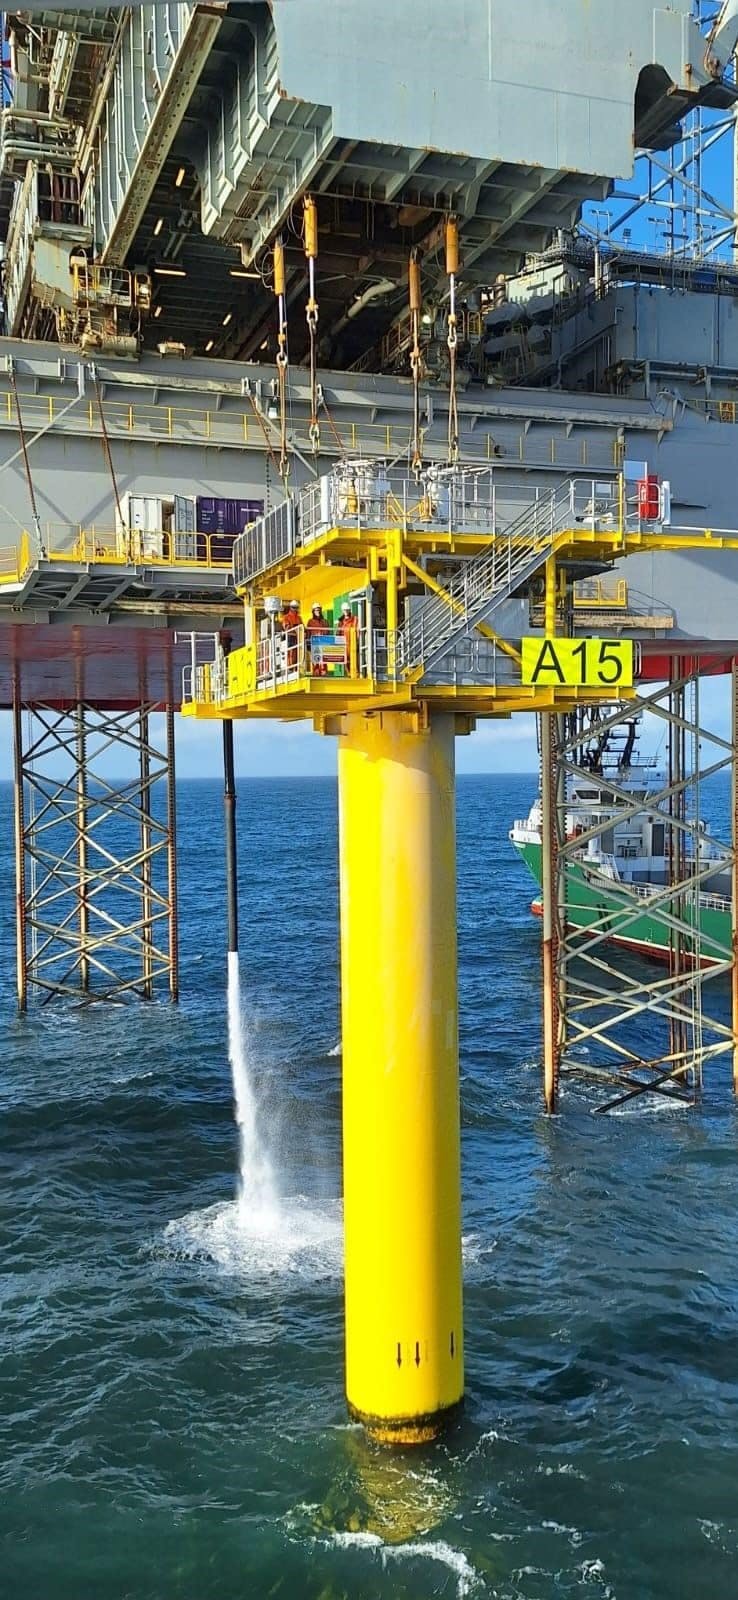 In February, first gas was achieved from the A15 platform in the Dutch North Sea by operator Petrogas. Viaro has a 27.6% stake in the platform via its main operating subsidiary RockRose Energy.